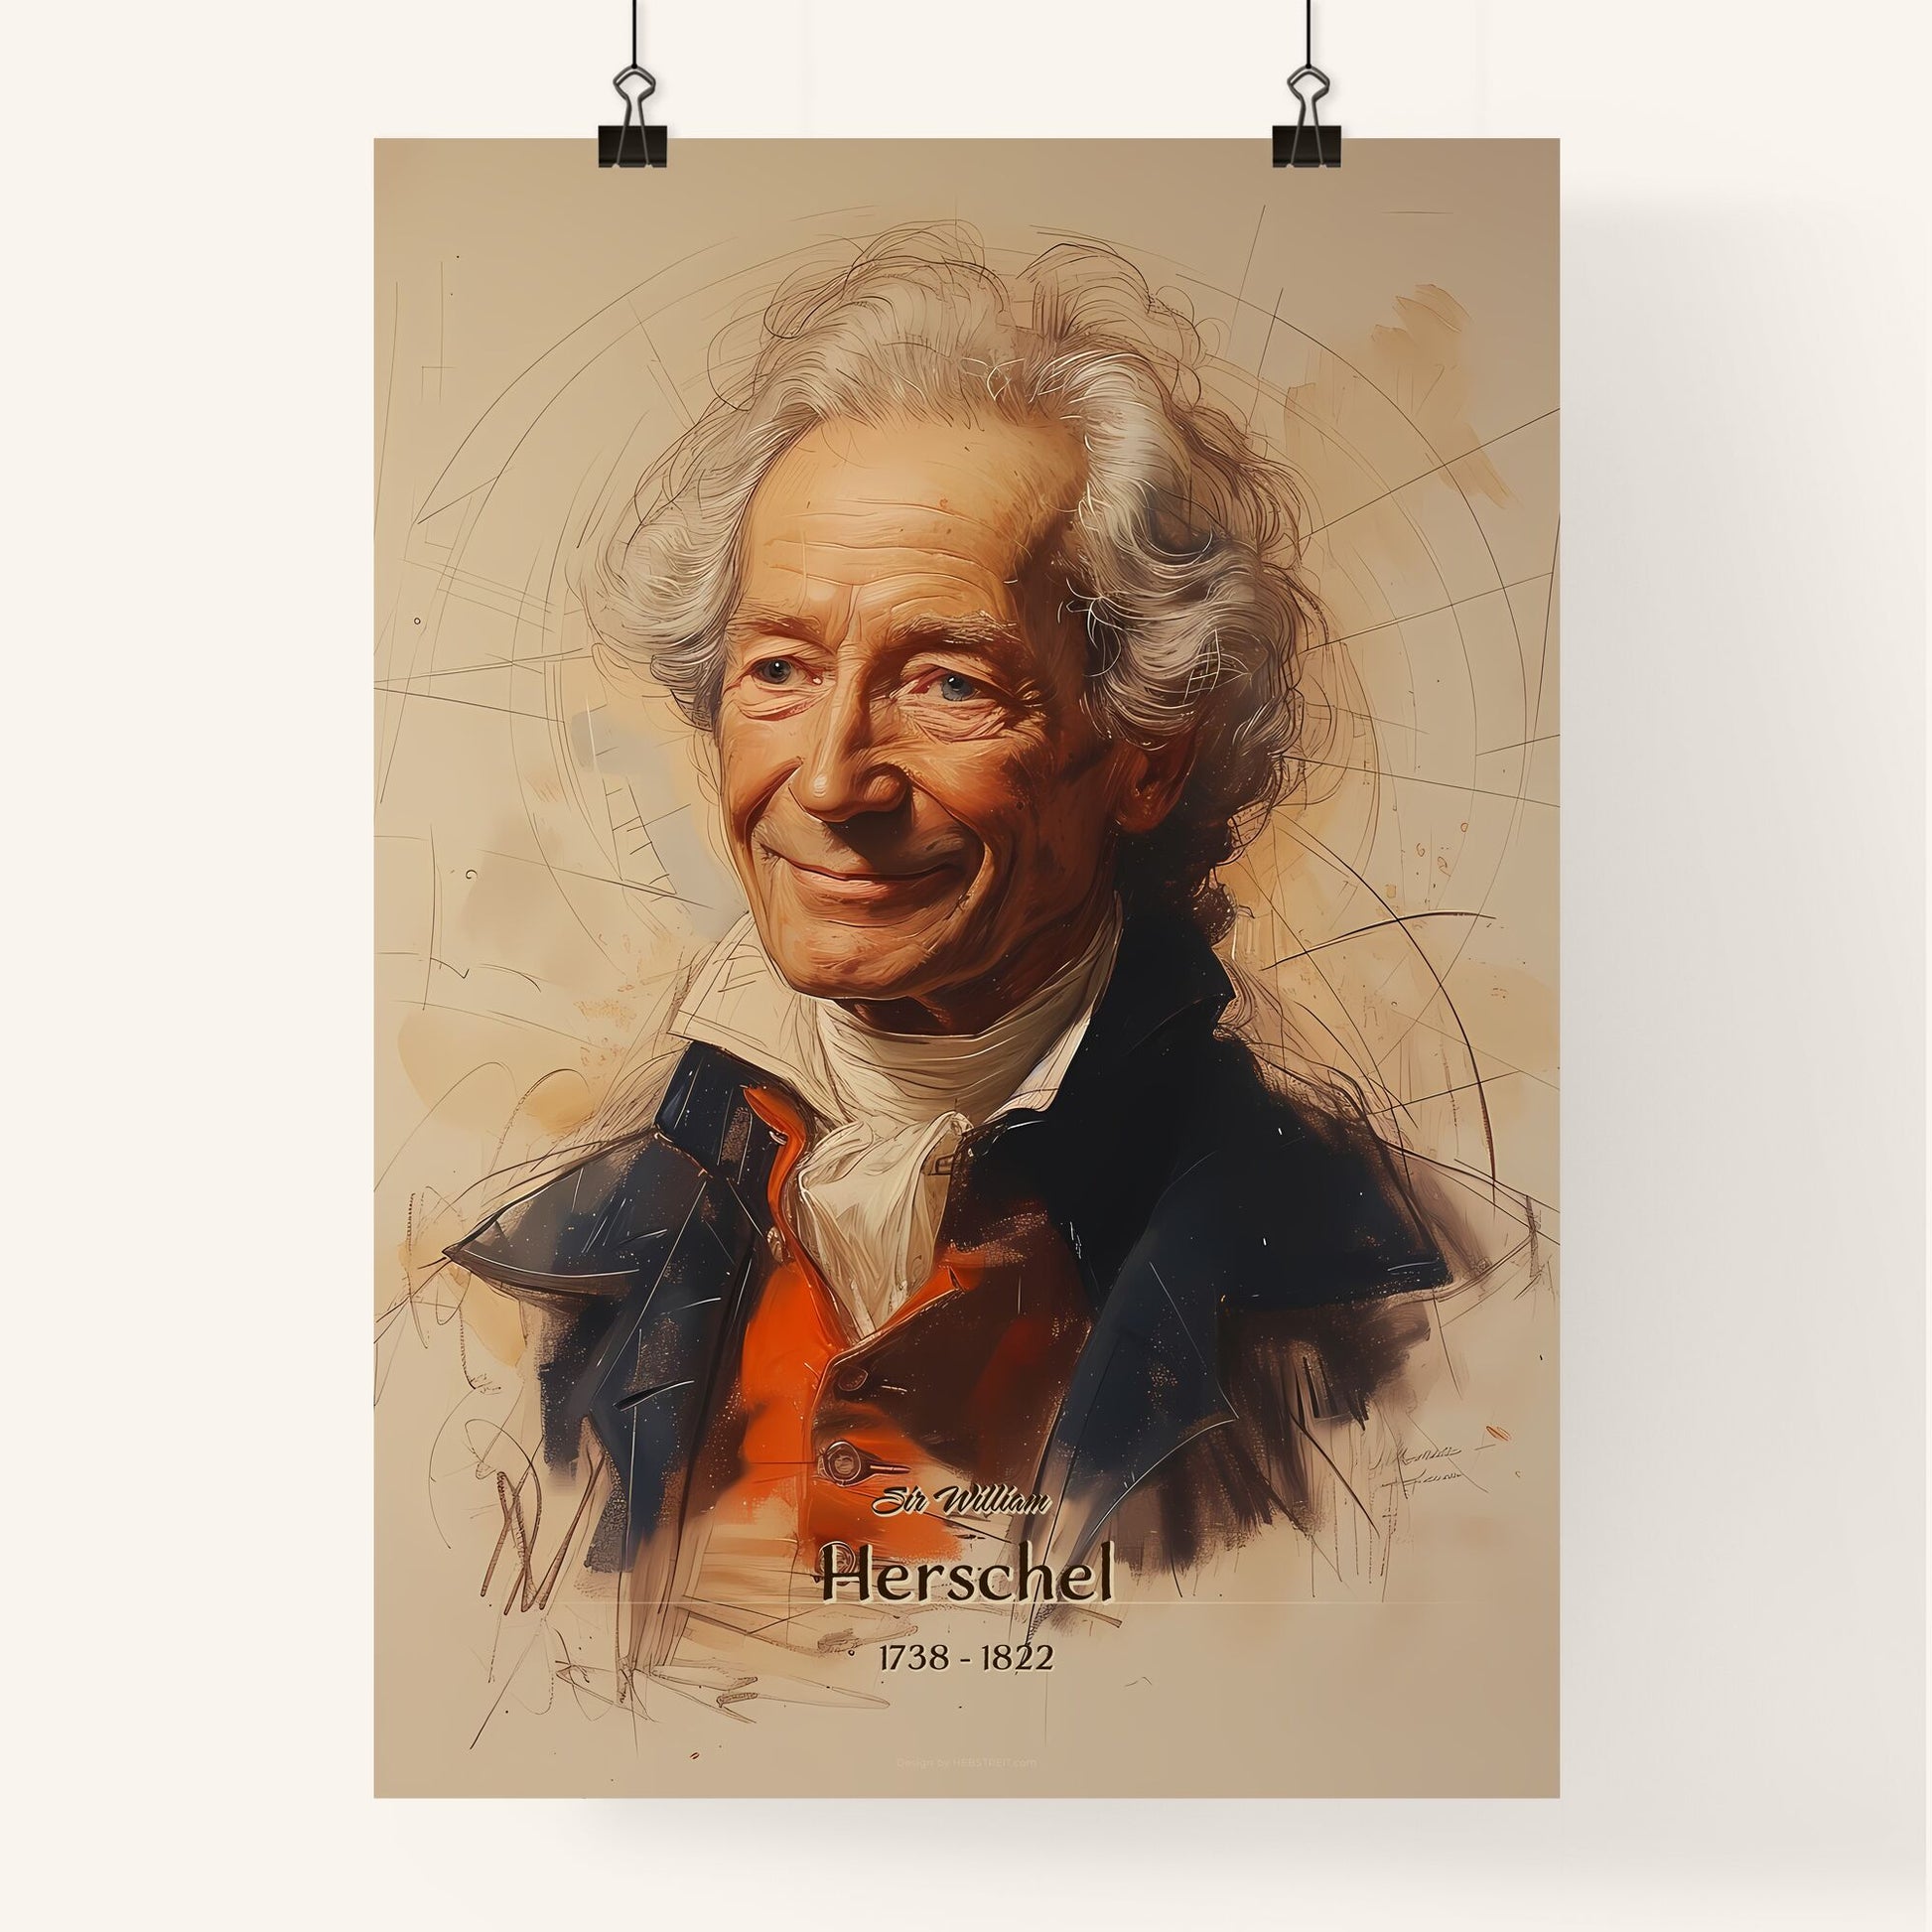 Sir William, Herschel, 1738 - 1822, A Poster of a painting of a man Default Title